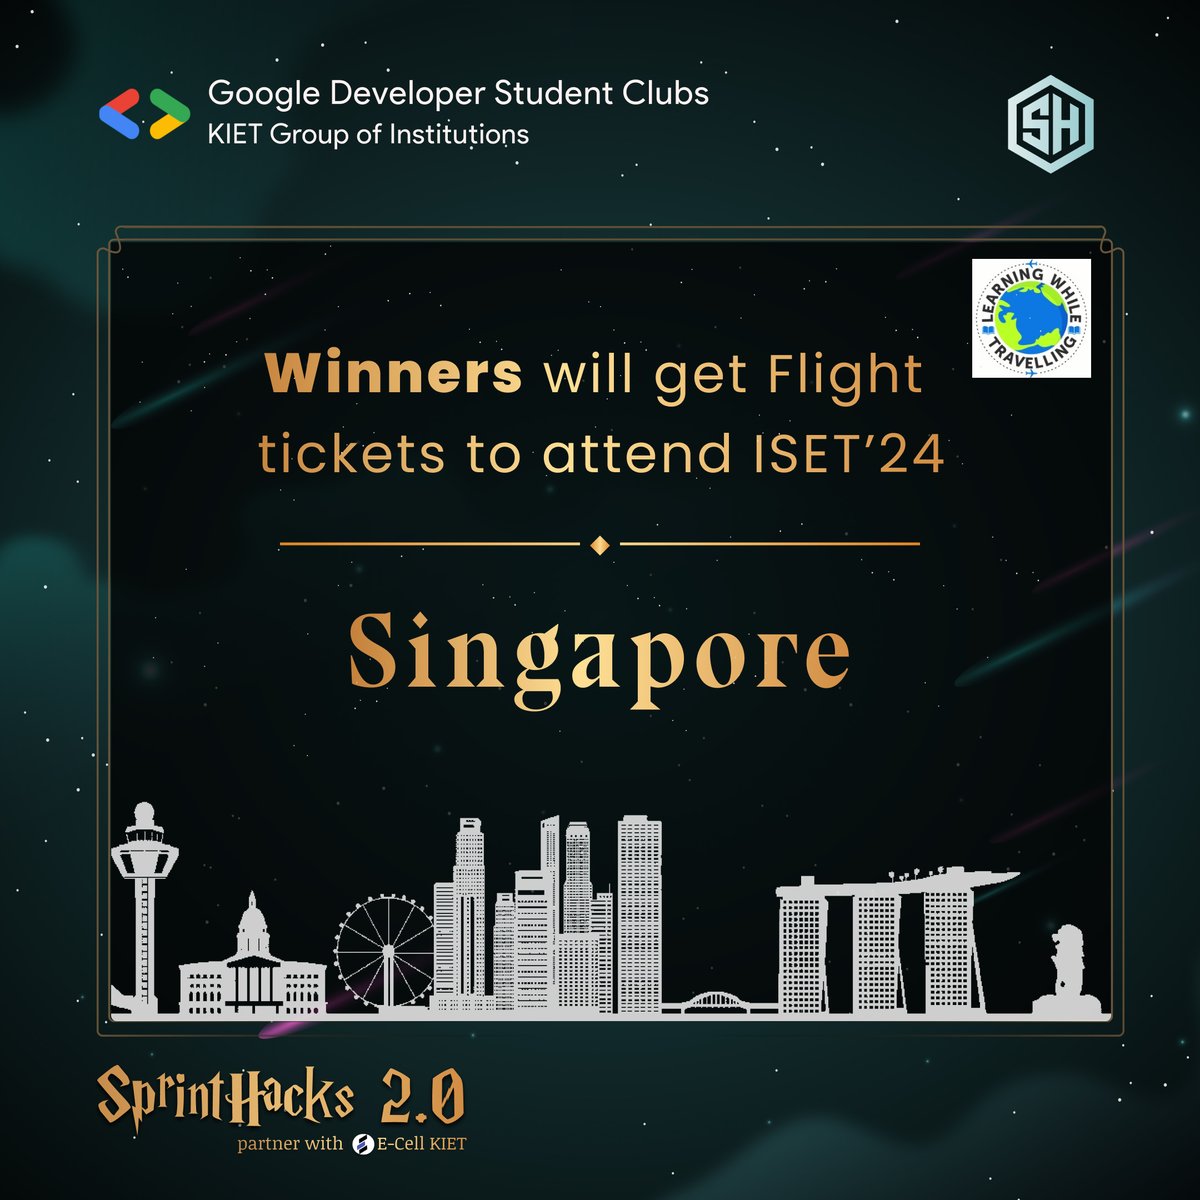 Hackathon? It's foreign trip 🌝 As Gold sponsors, Learning while Traveling (LWT) presents an exclusive chance for the top 3 teams to explore Singapore and attend ISET. So, don't wait , act now Register now: register.sprinthacks.in #gdsc #hackathon #tech #delhiNCR #sprinthacks